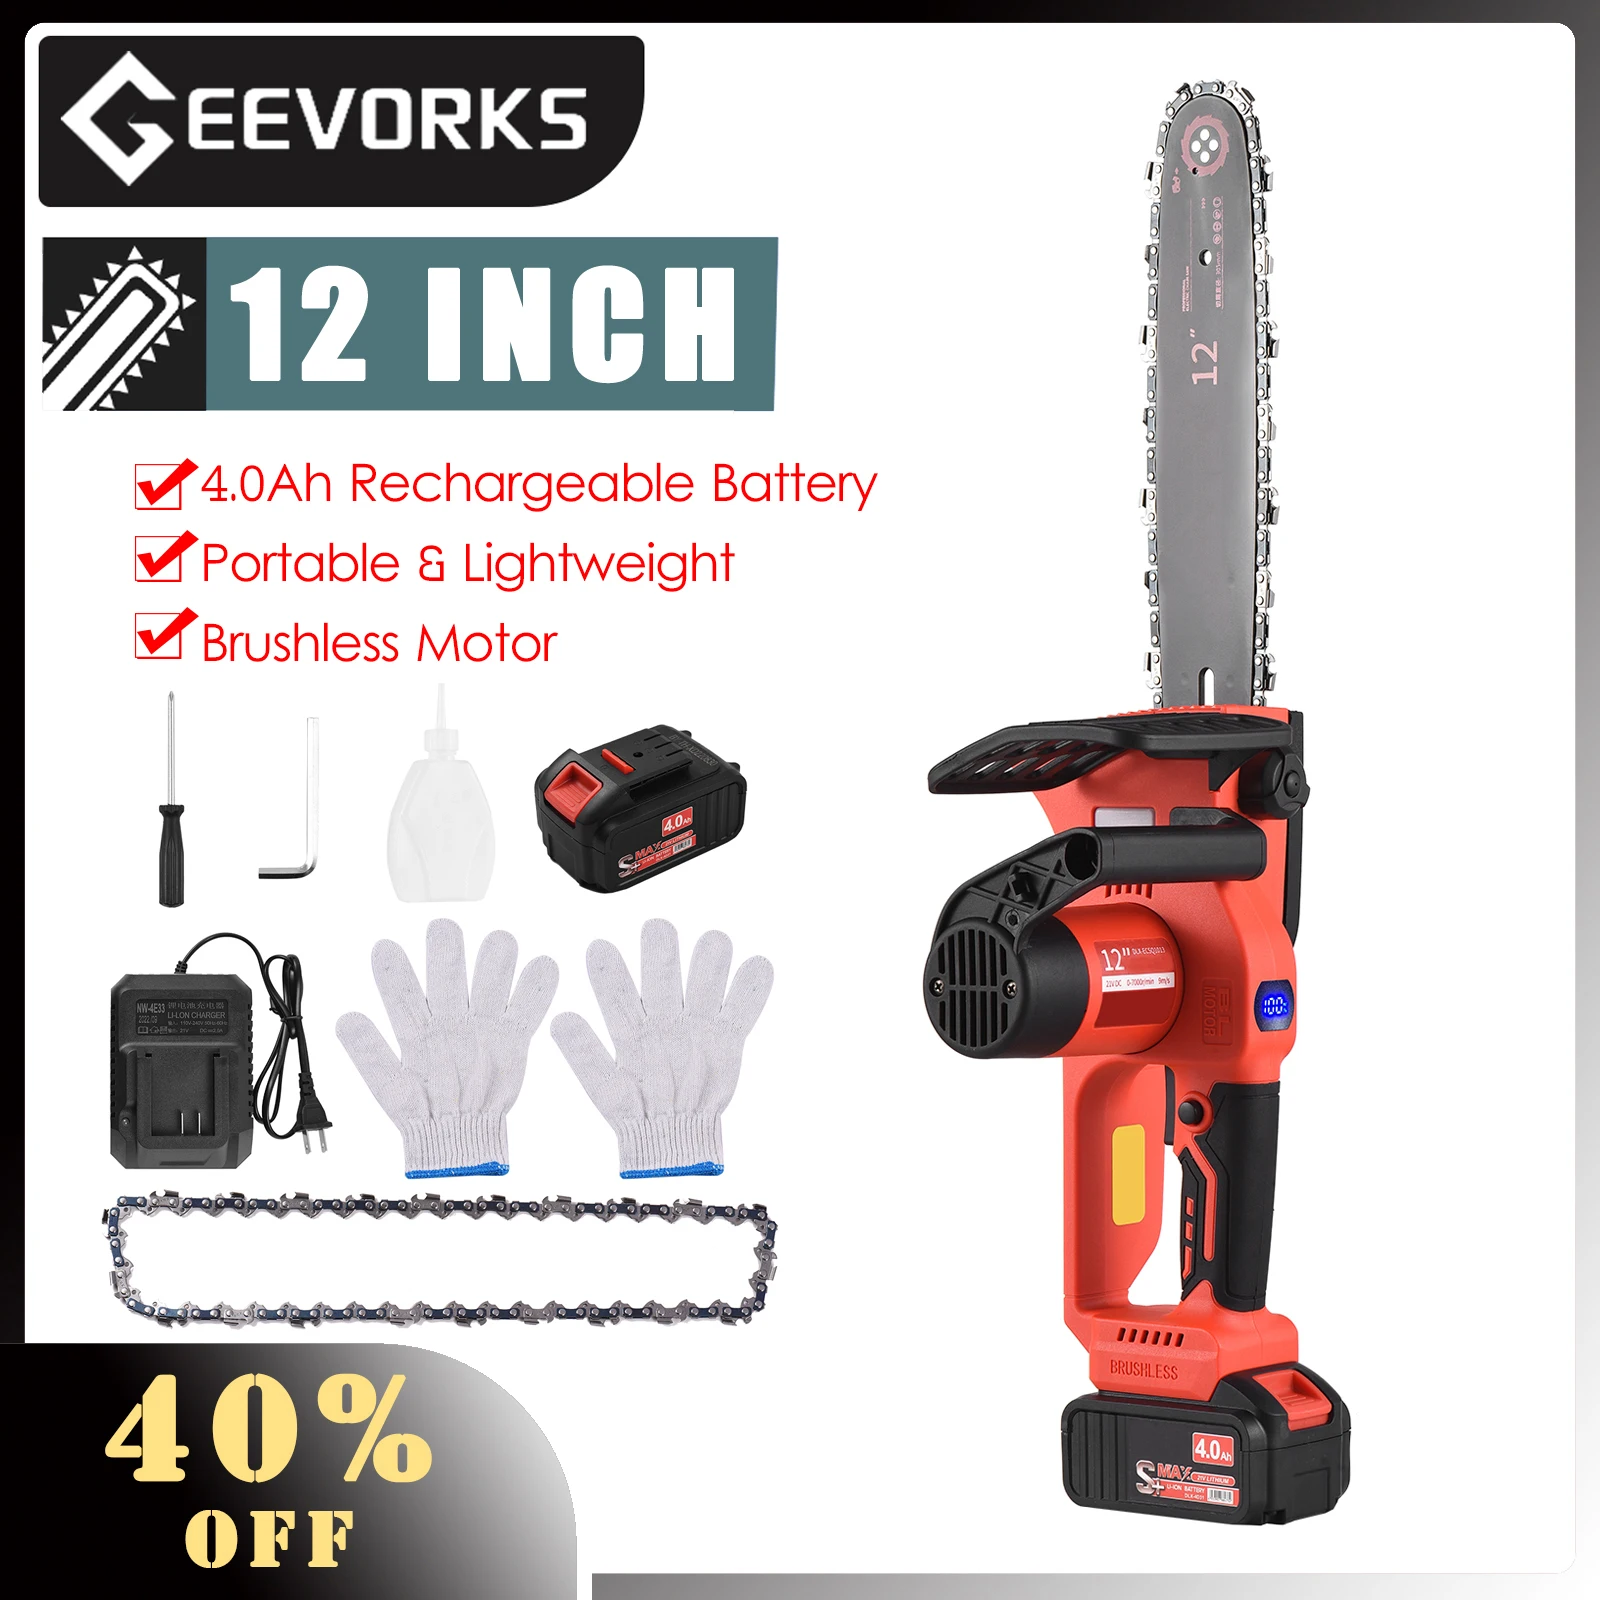 Geevorks 12-Inch Brushless Mini Cordless Chainsaw With 4.0Ah Battery: Efficient And Portable For Handheld Pruning And Wood Cut